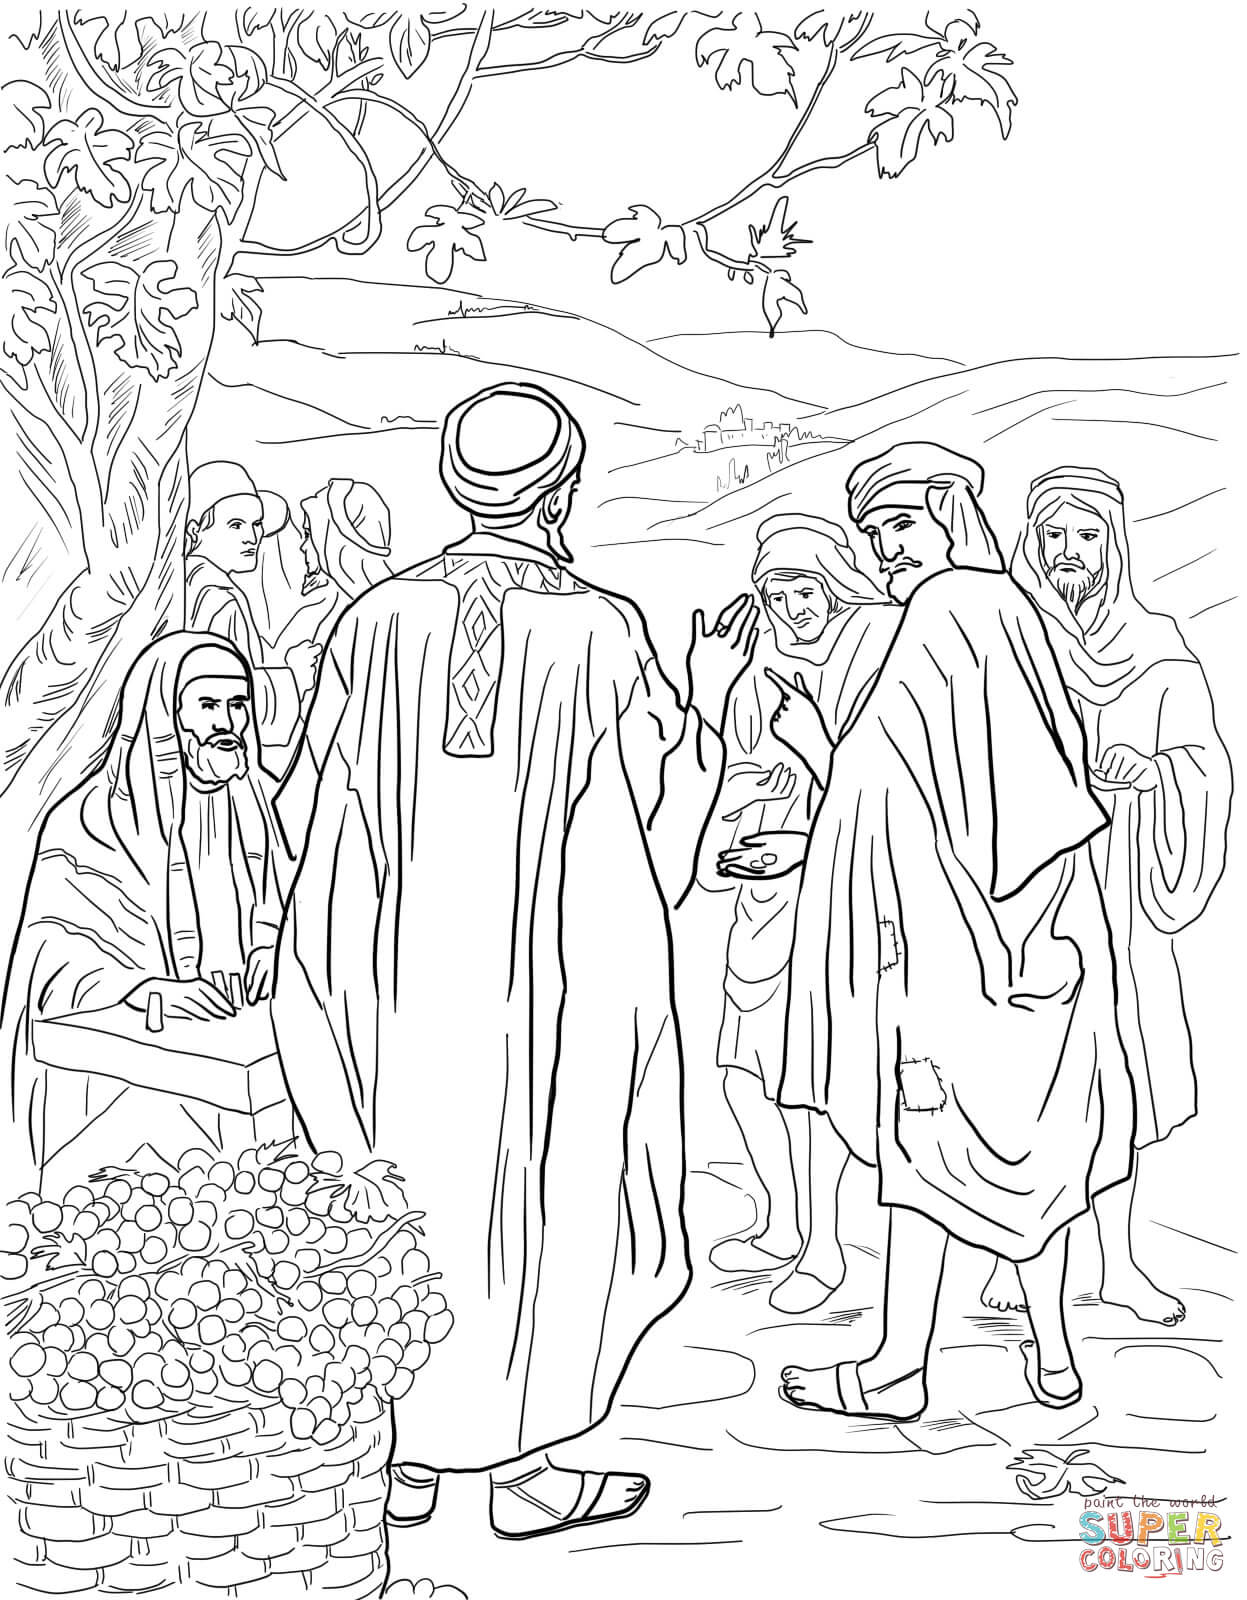 Ten Virgins Parable coloring page | Free Printable Coloring Pages